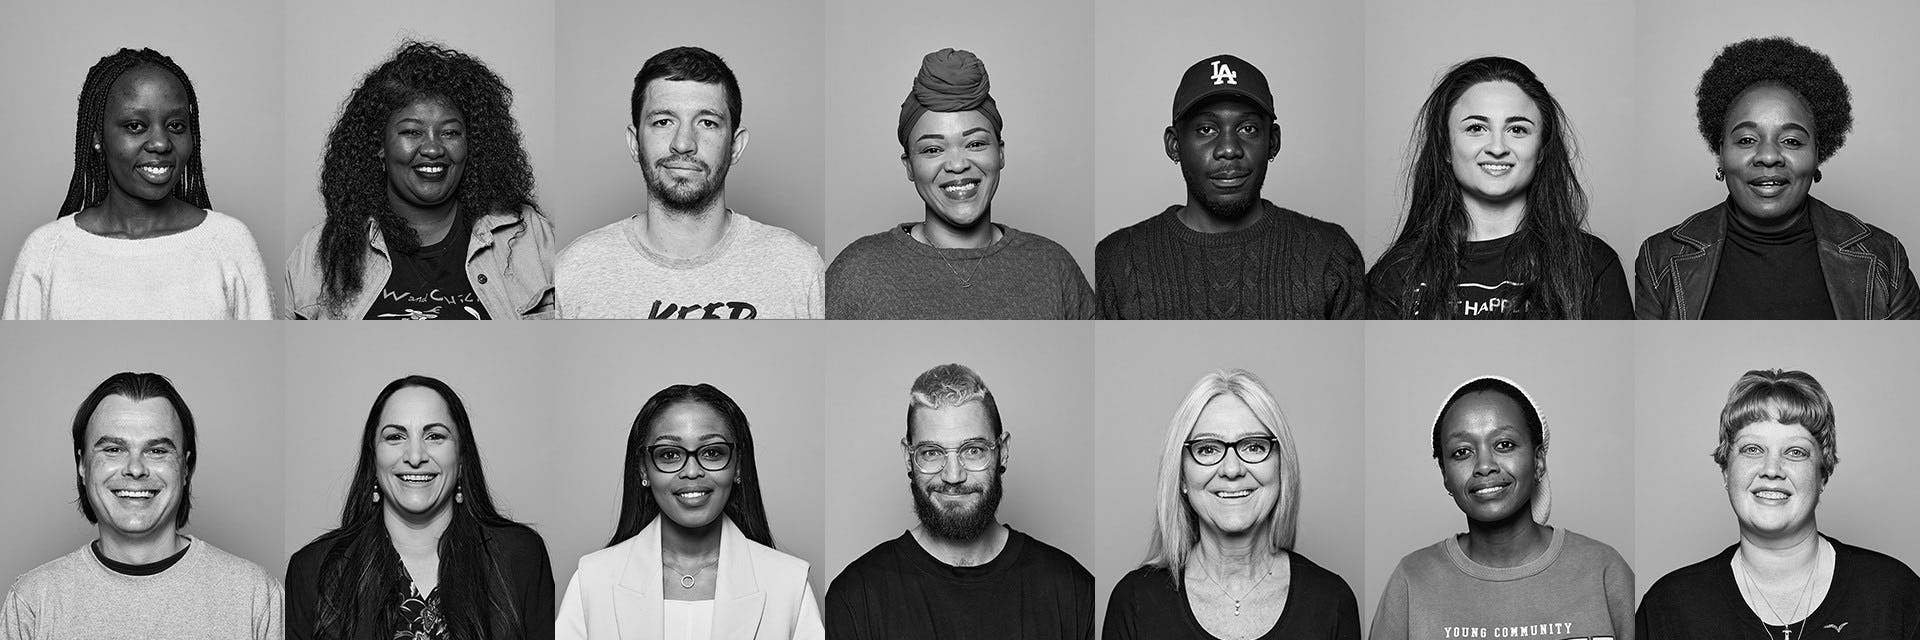 Portraits of Sauce Advertising employees